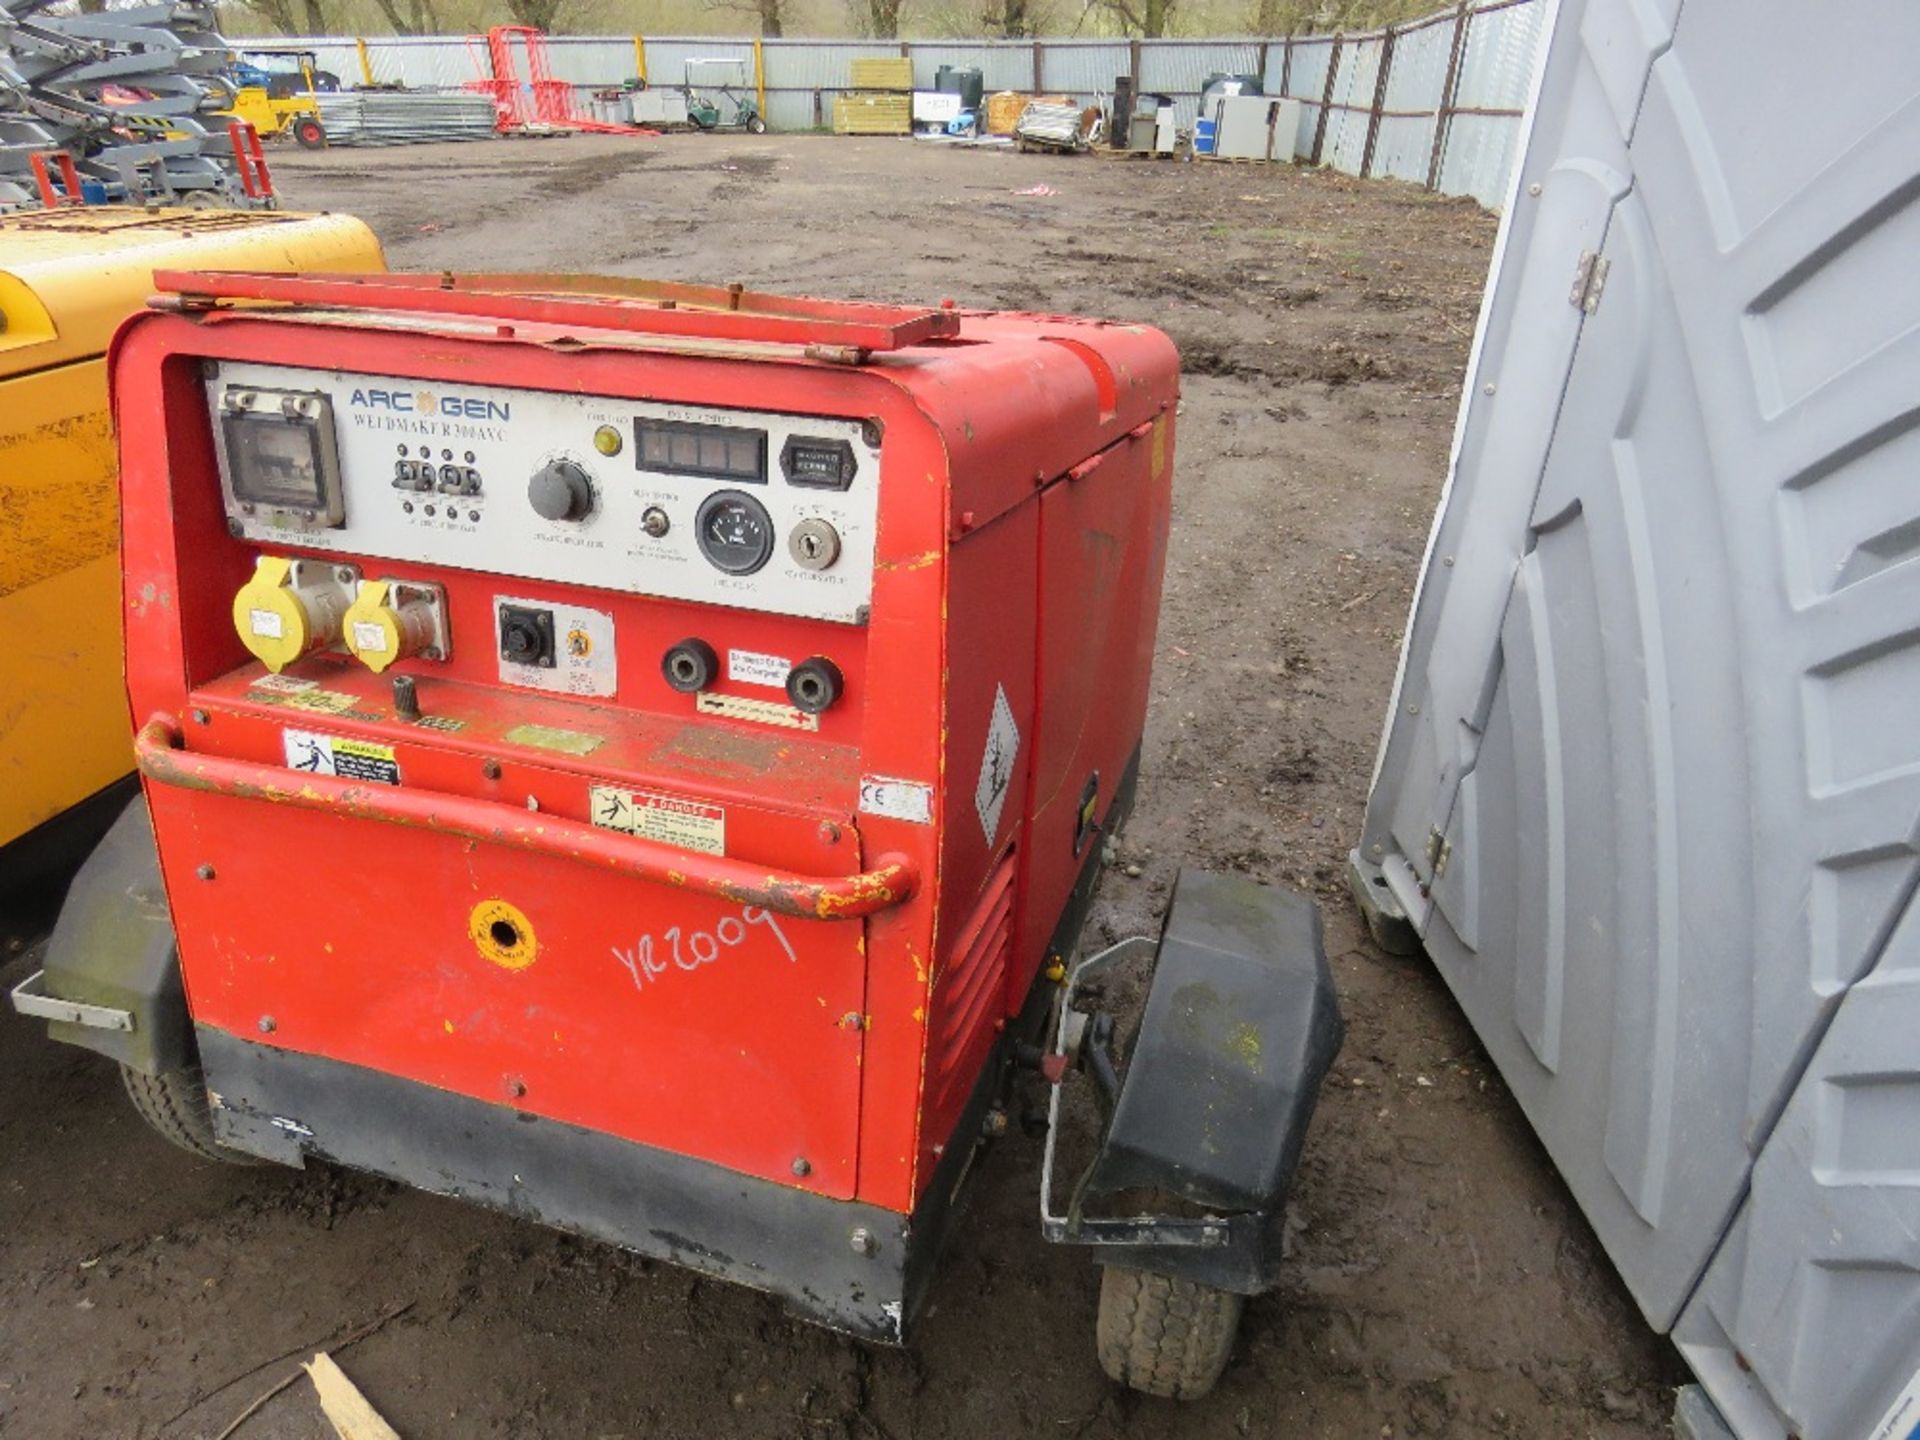 ARCGEN 300AVC TOWED WELDING PLANT. RED COLOURED, YEAR 2009 BUILD. SN:1302142. WHEN TESTED WAS SEEN T - Image 2 of 4